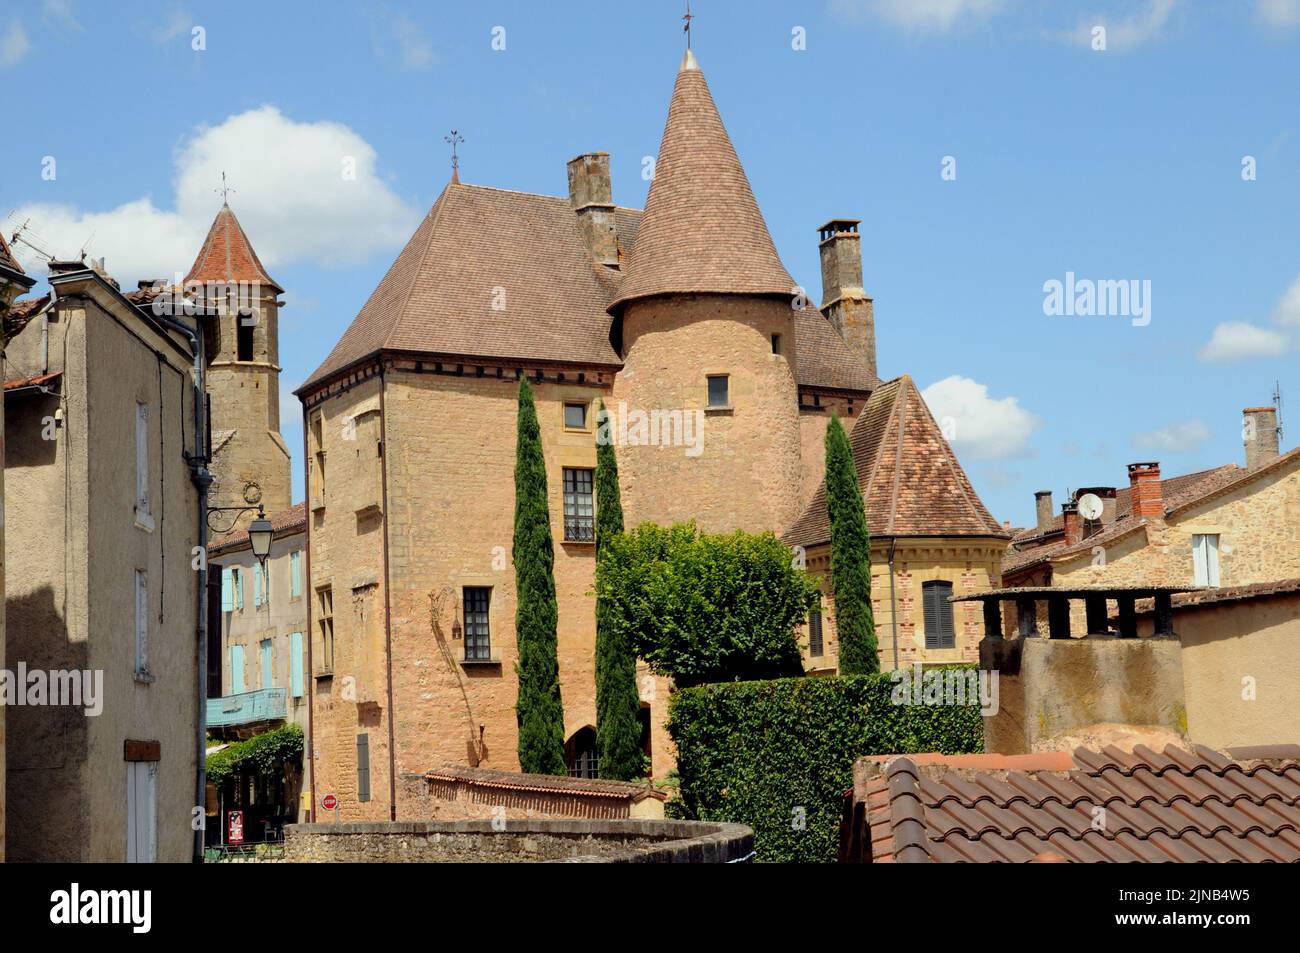 The château at Belvès in the Dordogne region of south west France dates from the 14th century. Unusually it is within the town rather than outside. Stock Photo